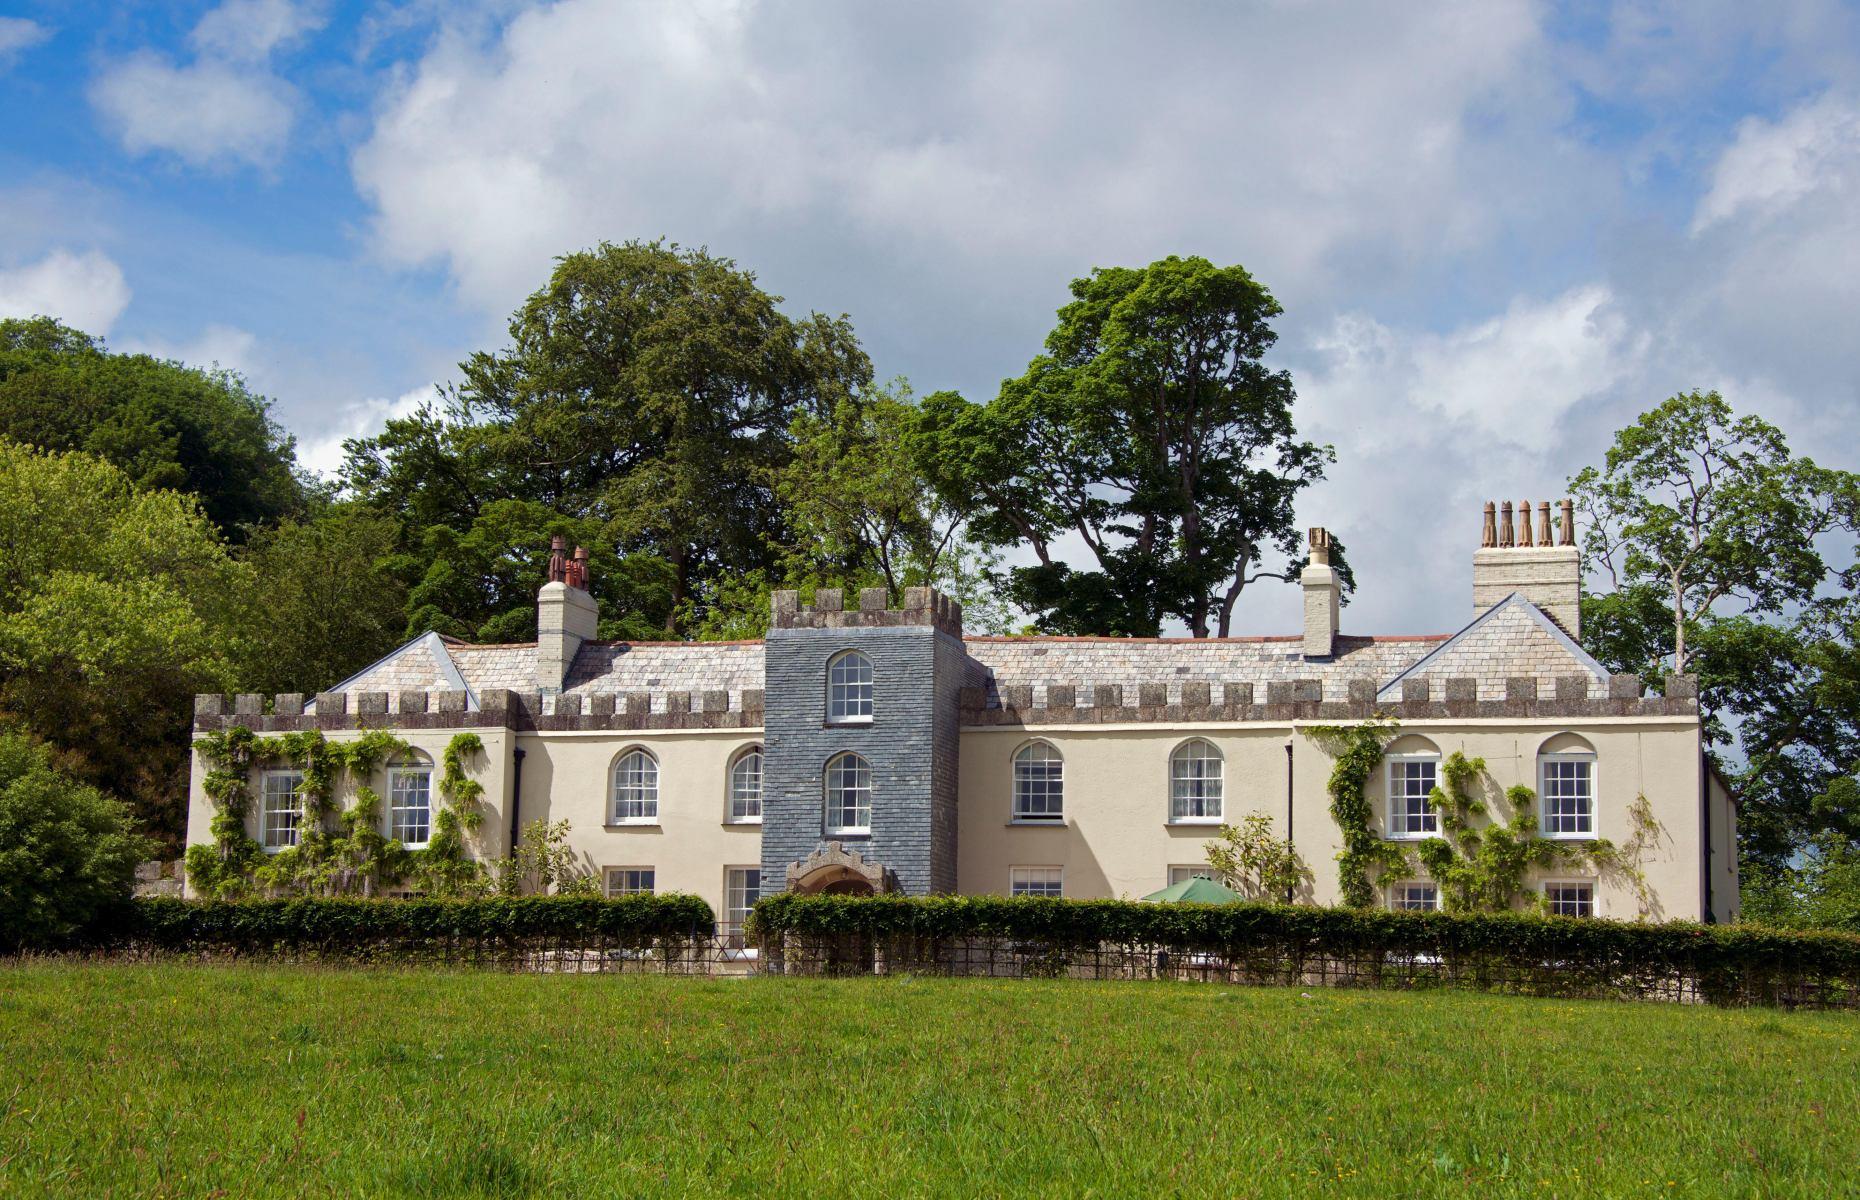 <p>Nestled in the heart of the Fowey Valley in Cornwall, Restormel Manor is an elegant 1540s manor house that was restored in the 18th century. While it remains the official residence of King Charles lll and Queen Camilla when they are in the county, it is available to rent as part of the <a href="https://www.duchyofcornwallholidaycottages.co.uk/properties/restormel-manor">Duchy Estate</a> at other times.</p>  <p>The Strawberry Hill Gothic-styled mansion, with its crenellated façade, lies in the shadow of a 13th-century castle and in Cornish 'Restormel' means 'King’s Tower Hill.'</p>